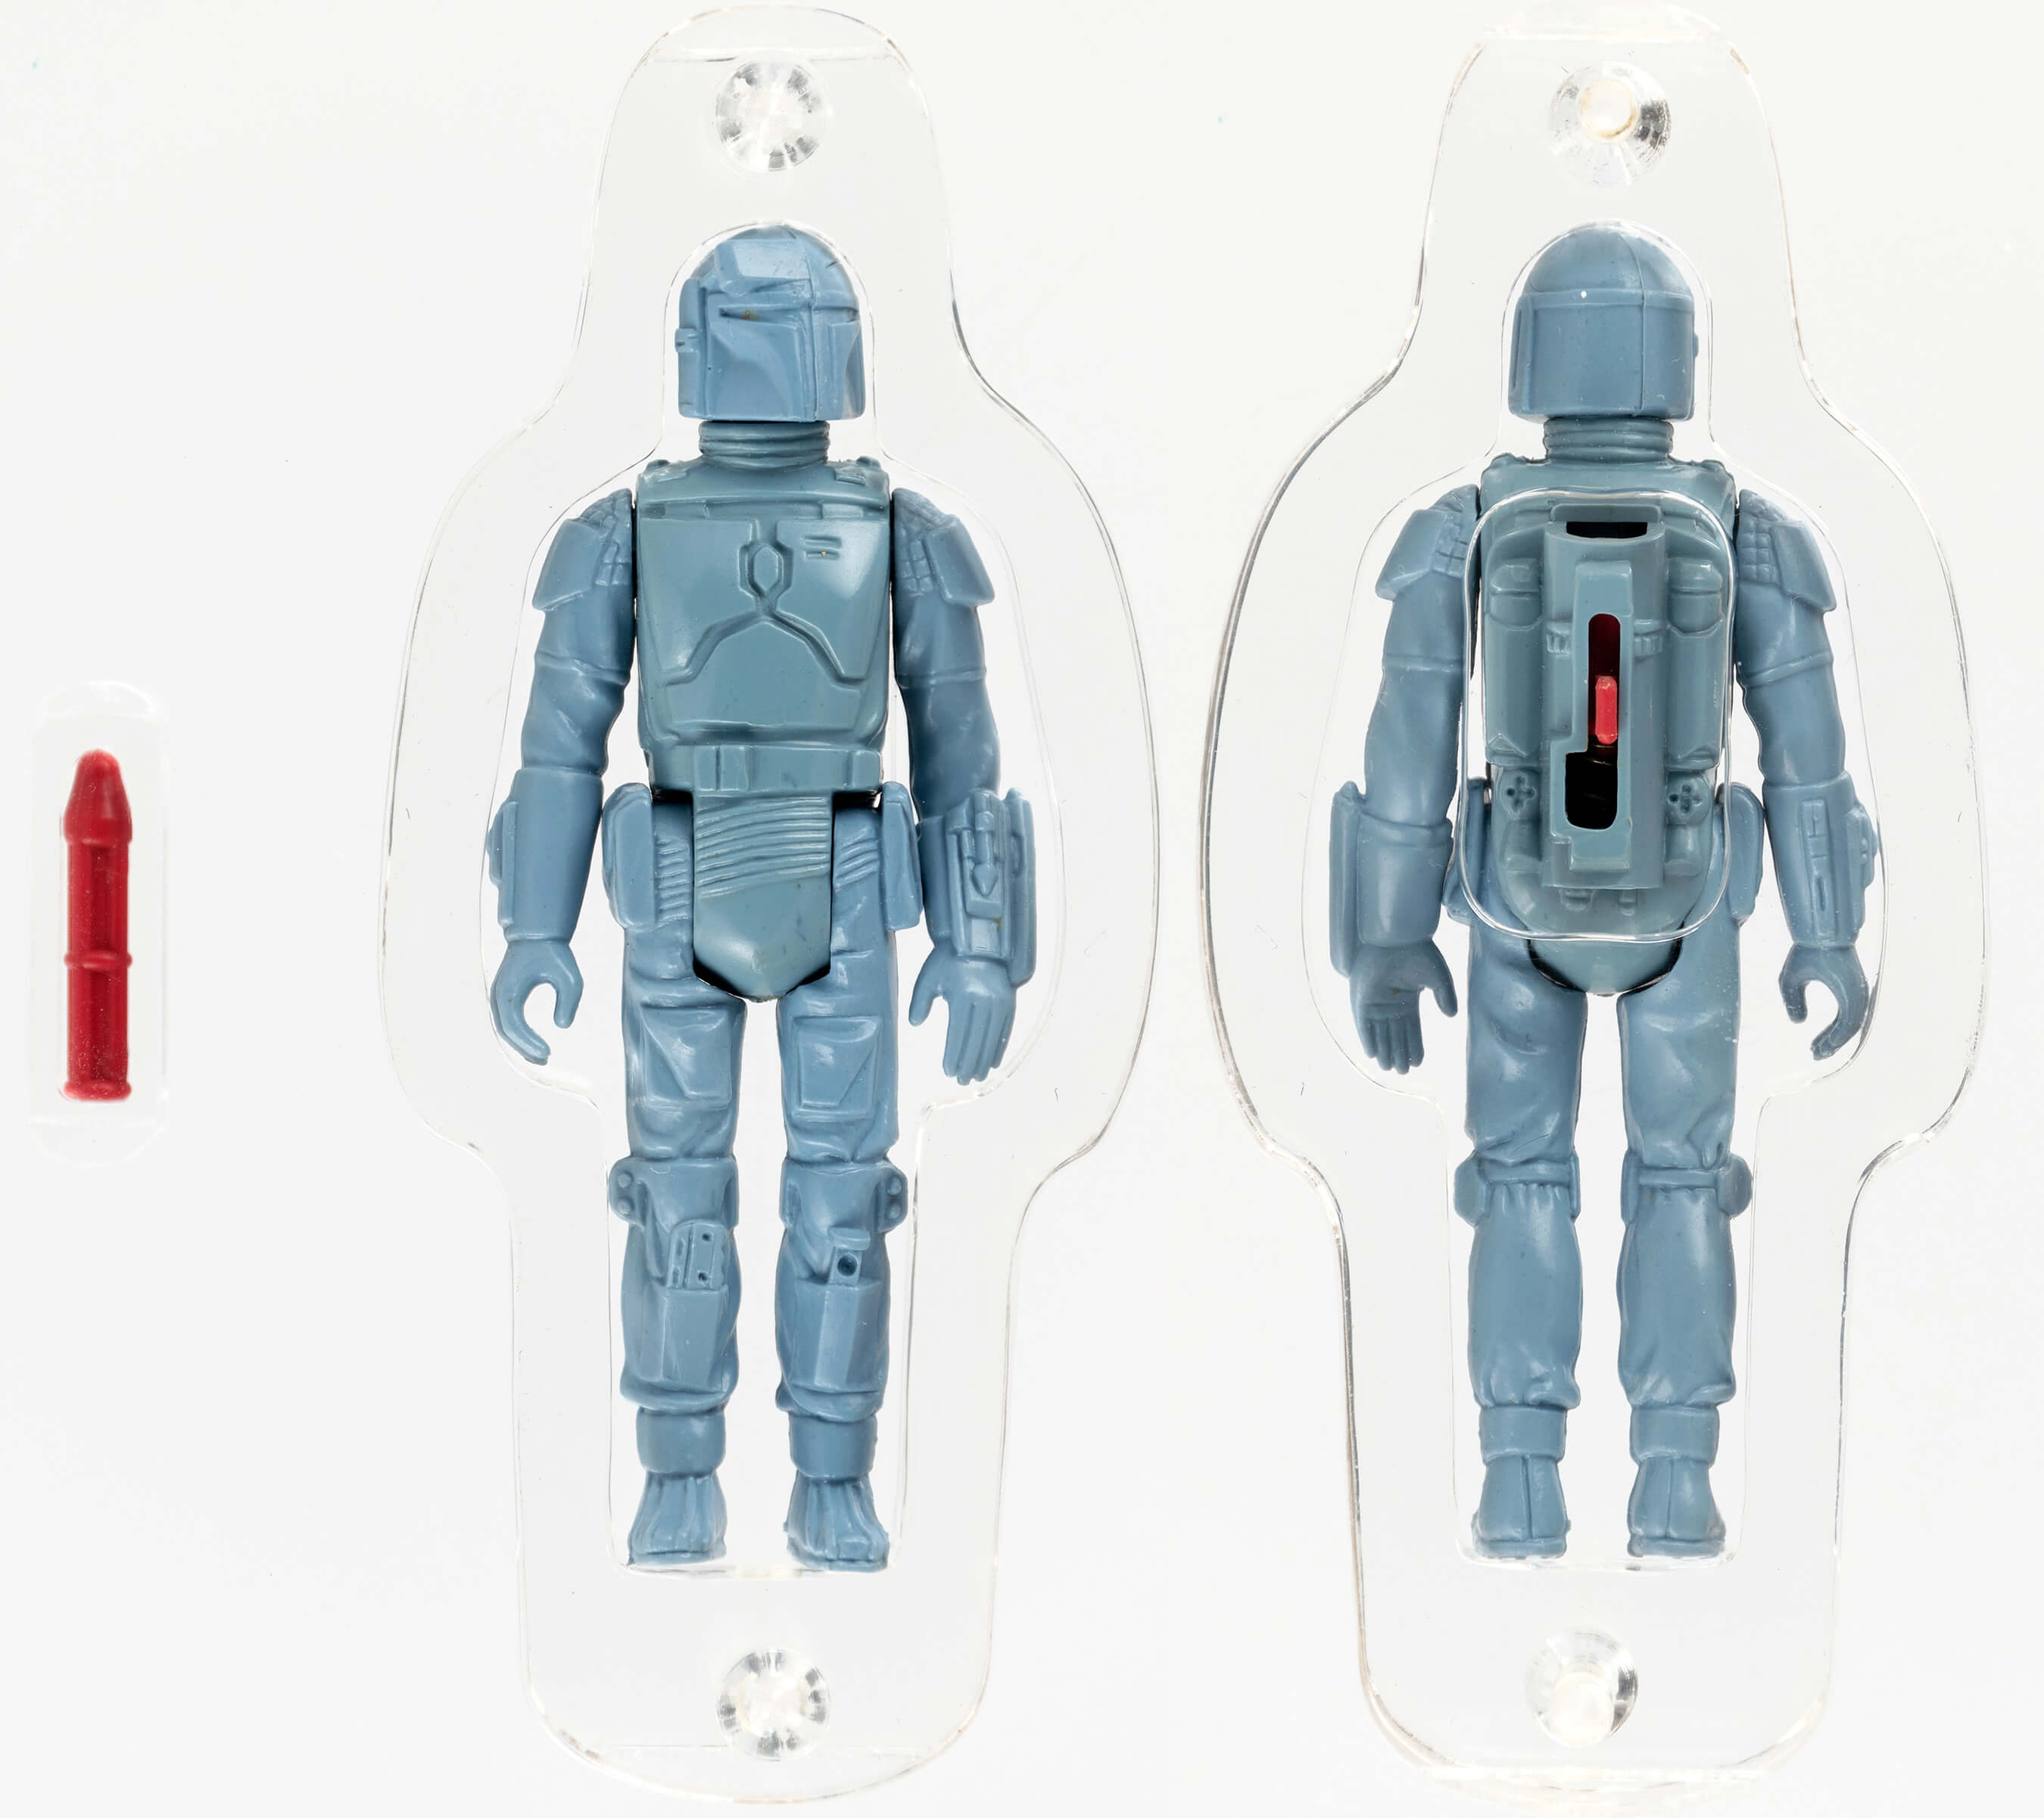 Star Wars Boba Fett L-slot rocket-firing prototype for Kenner’s action figure from the company’s popular 1979 Star Wars toy line. Measures 3.75in tall, AFA-graded 85 NM+ and archivally cased. Comes with notarized CIB LOA. Est. $200,000-$350,000. Image courtesy of Hake’s Auctions